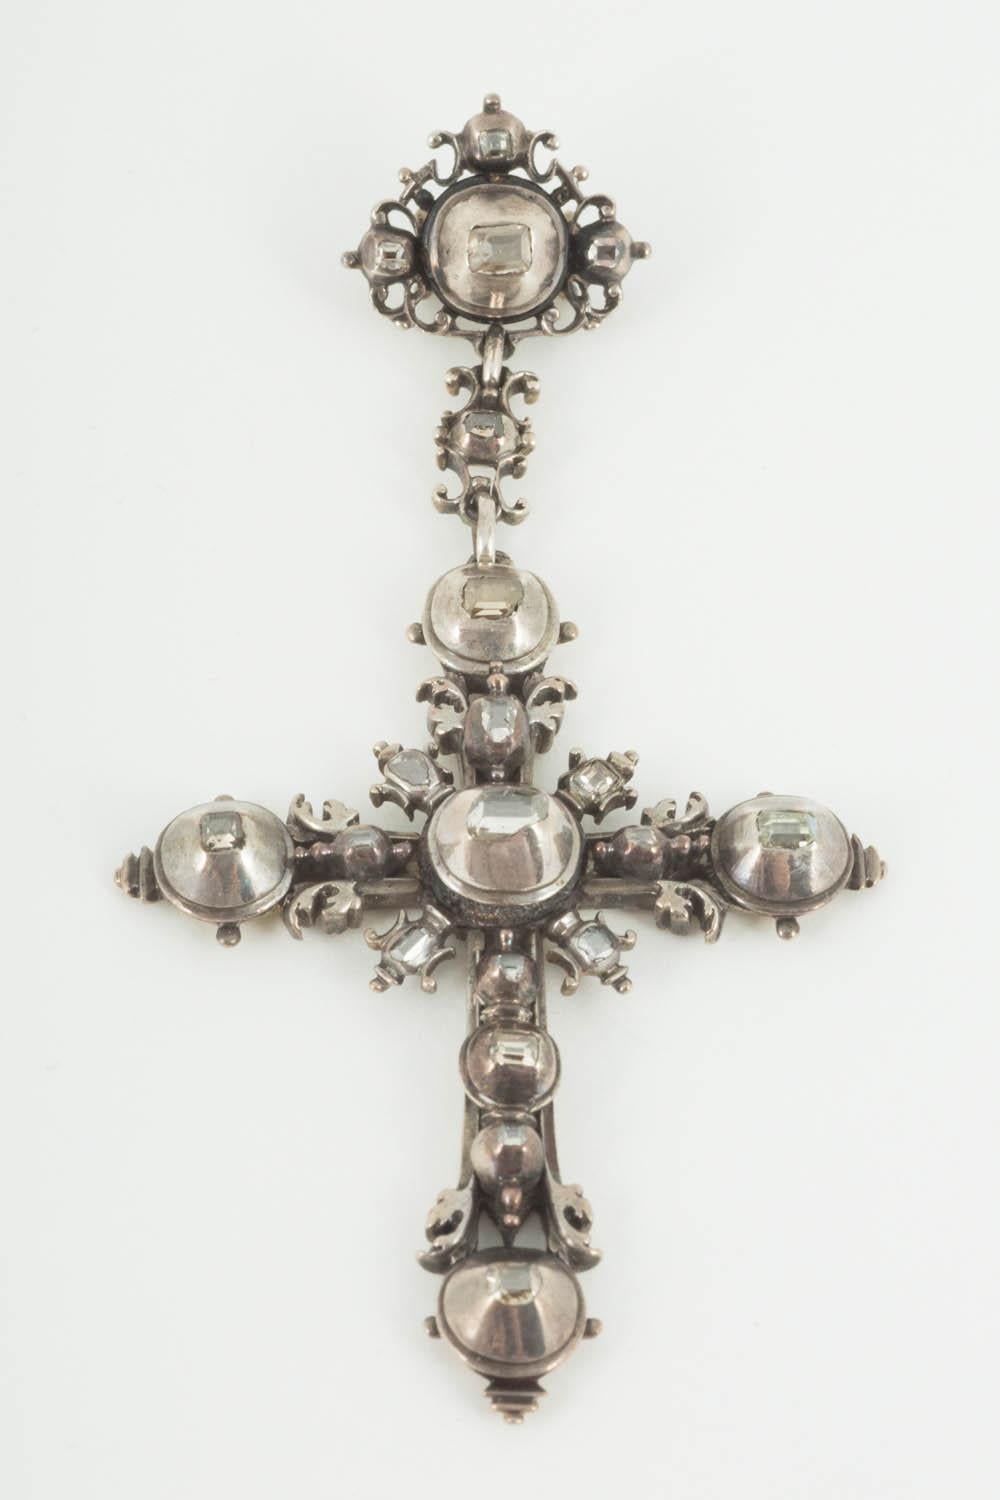 A rare antique piece dating back to the early 18th century of a silver cross set with 20 table cut diamonds, all of them foiled backed which is typical of the period. The pendant has a beautiful scrolled floral design and is substantial in